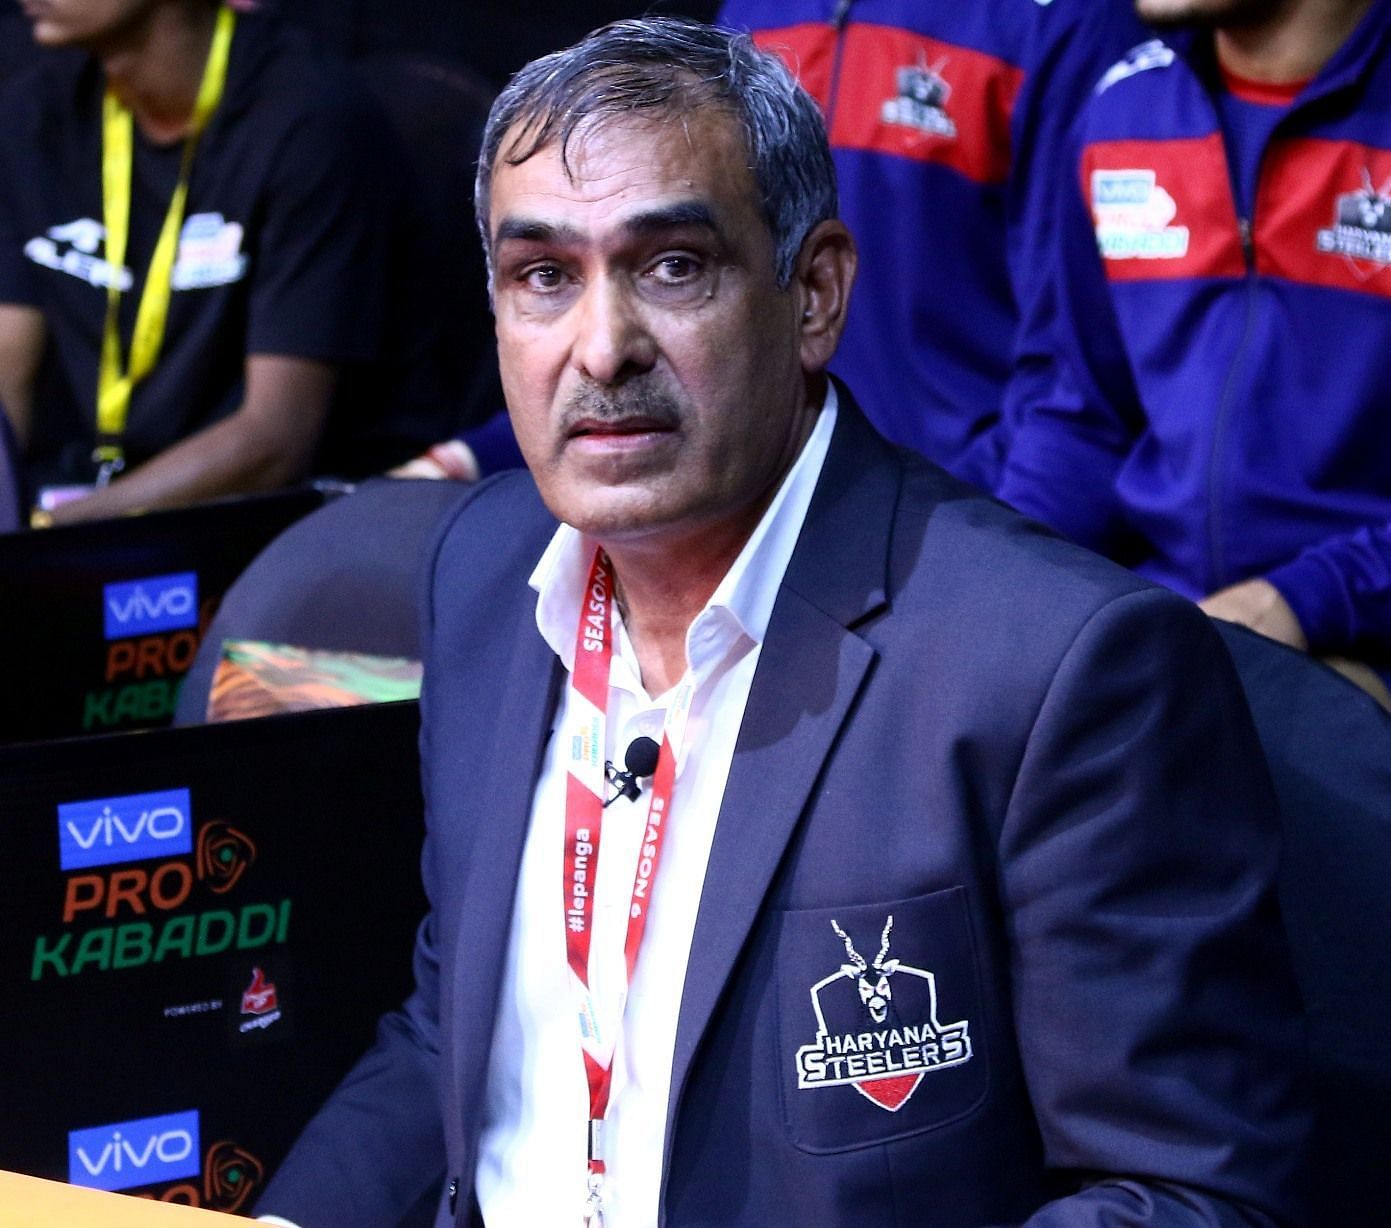 Rambir Singh Khokhar, a renowned kabaddi coach and recipient of the Dronacharya award, has been appointed as the new coach of Dabang Delhi KC in the Pro Kabaddi League. Joining him as the assistant coach is former Indian superstar Ajay Thakur, adding a wealth of experience to the team.